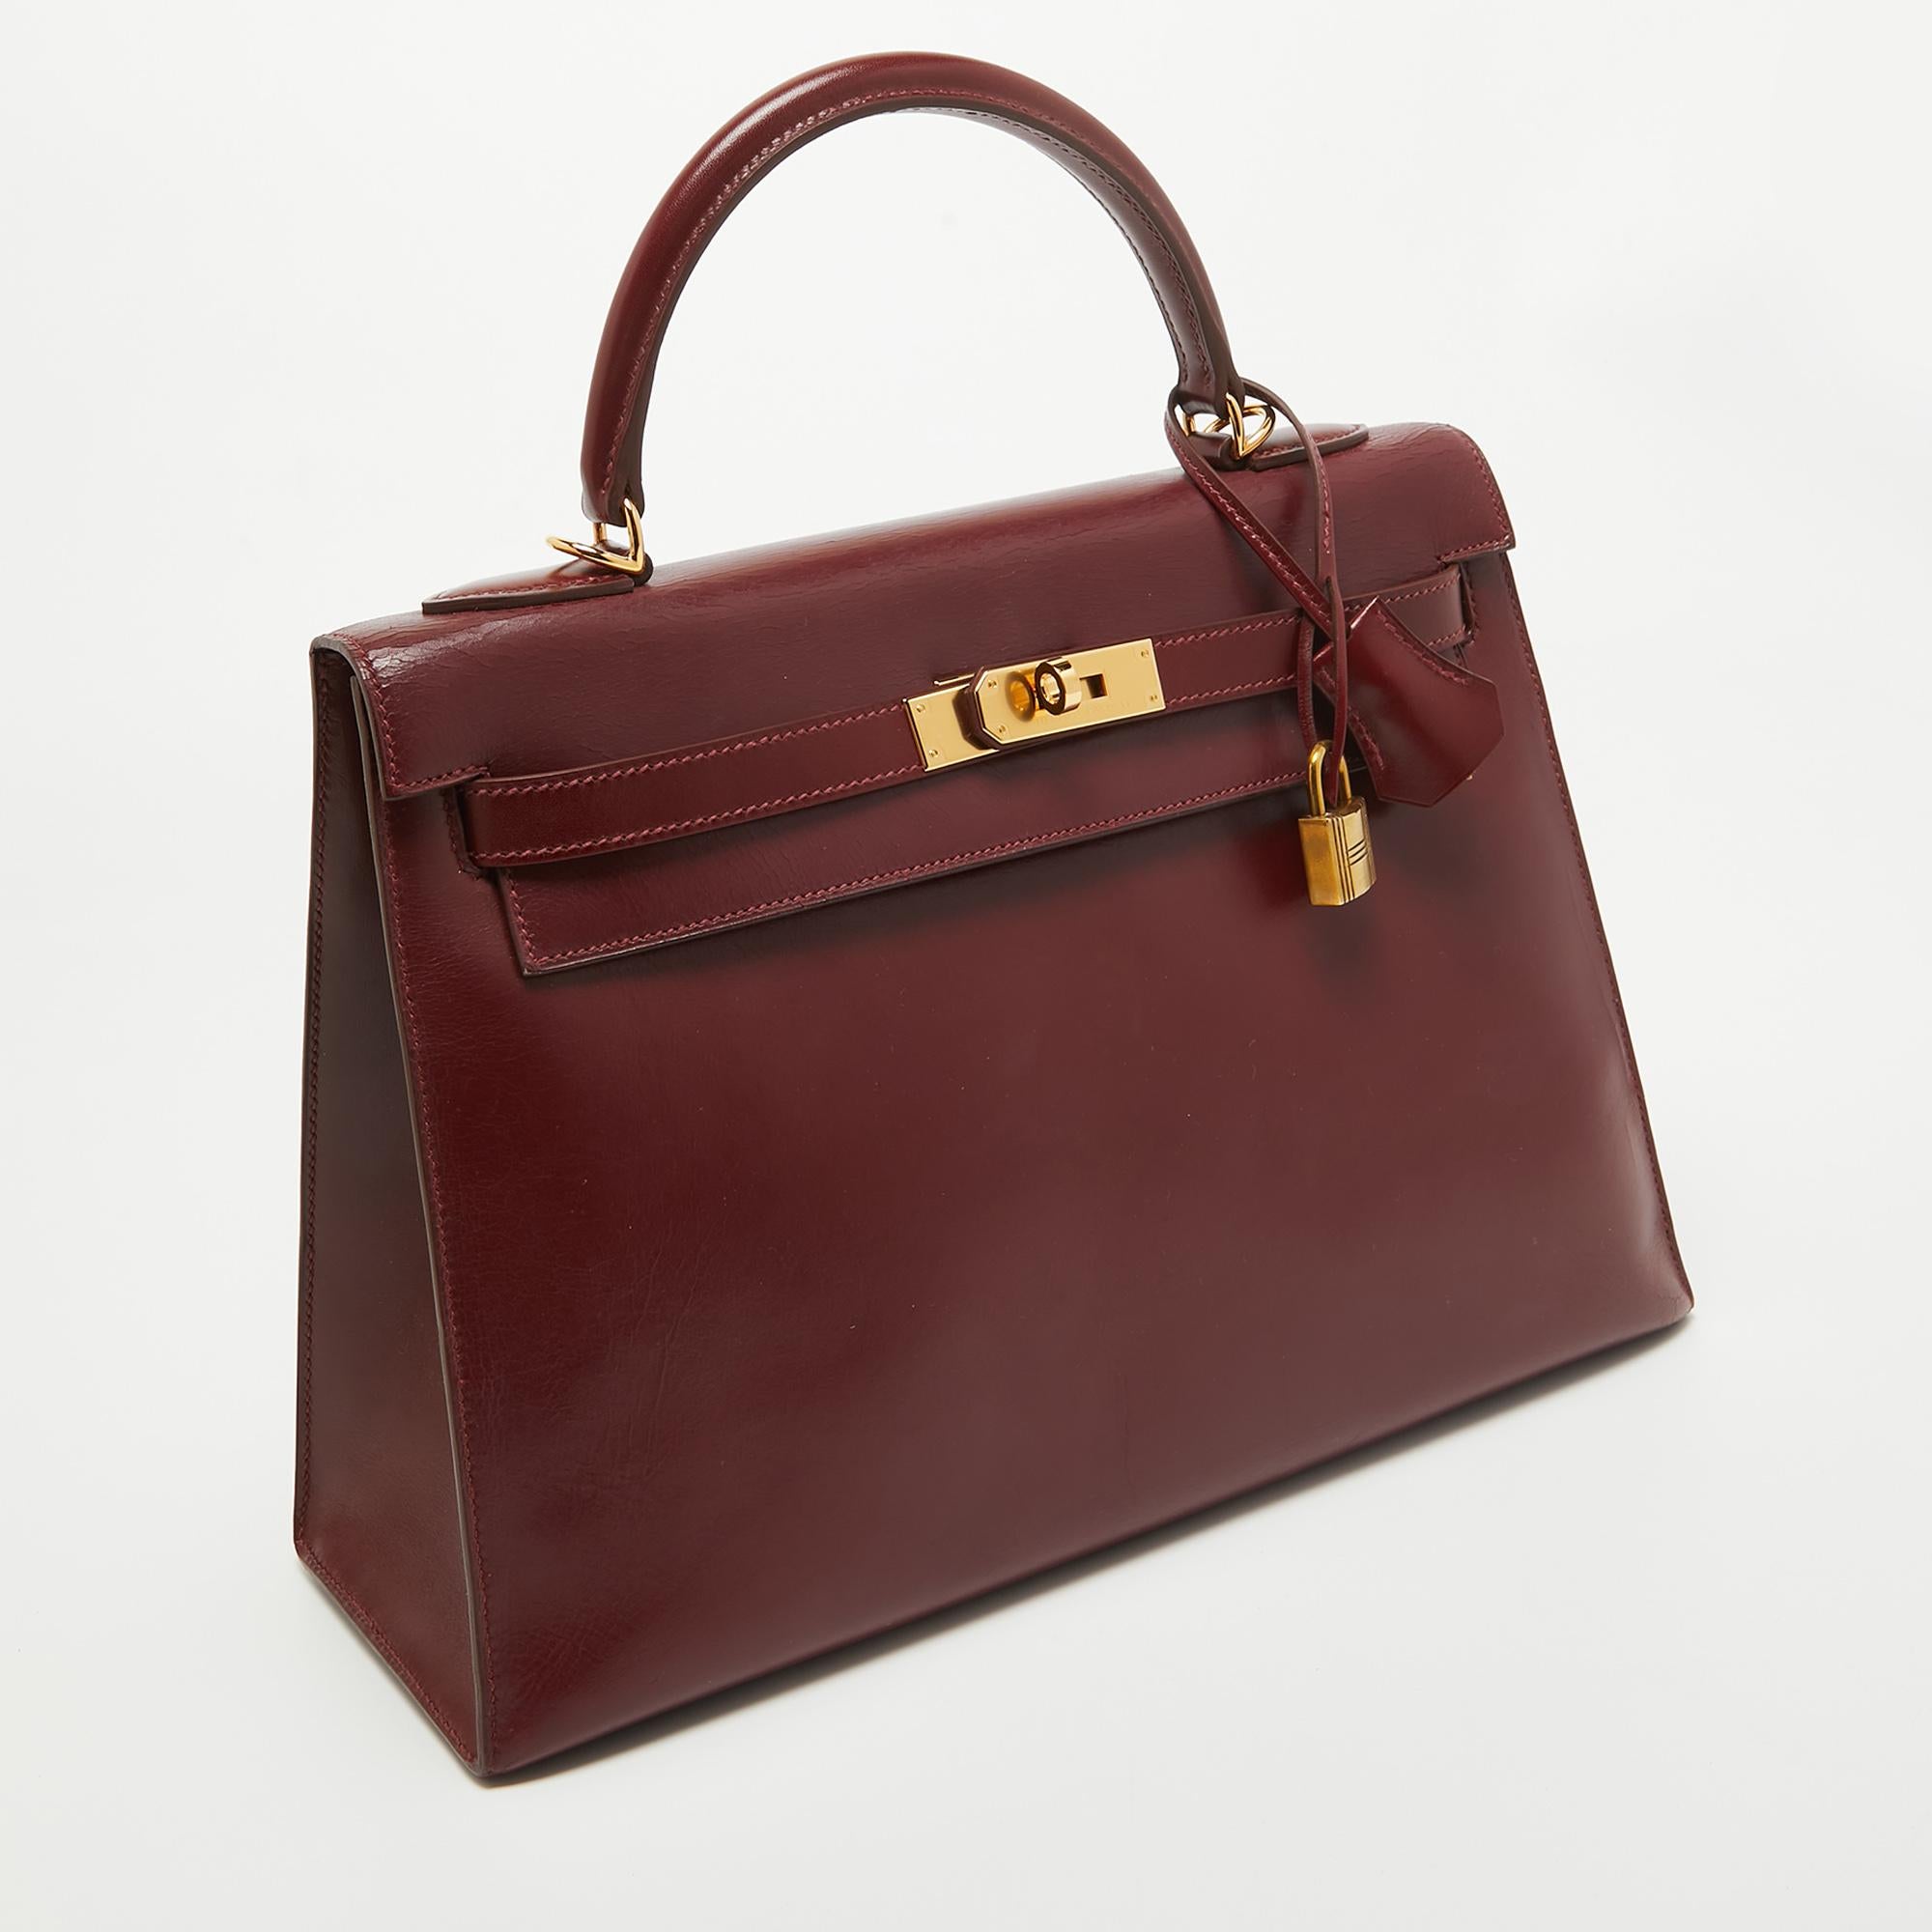 When it comes to beautiful bags, there are hardly any that can come close to the Hermès Kelly. It is a creation filled with beauty, utility, and value. We have here the Kelly Sellier 32 in gold-finished hardware. Carefully hand-stitched to